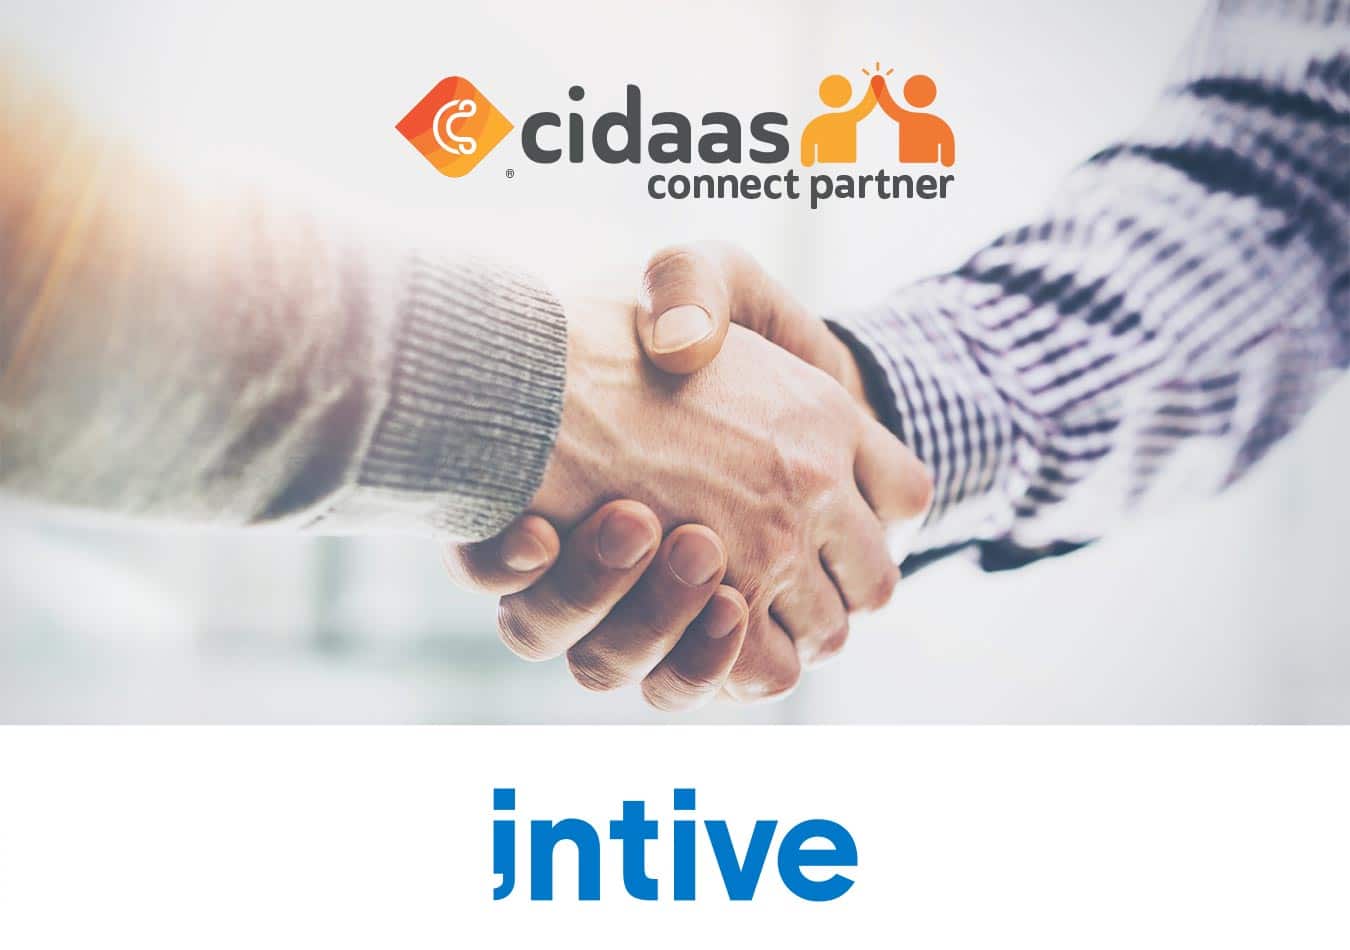 cidaas and intive bundle their expertise in identity management for advanced digital solutions